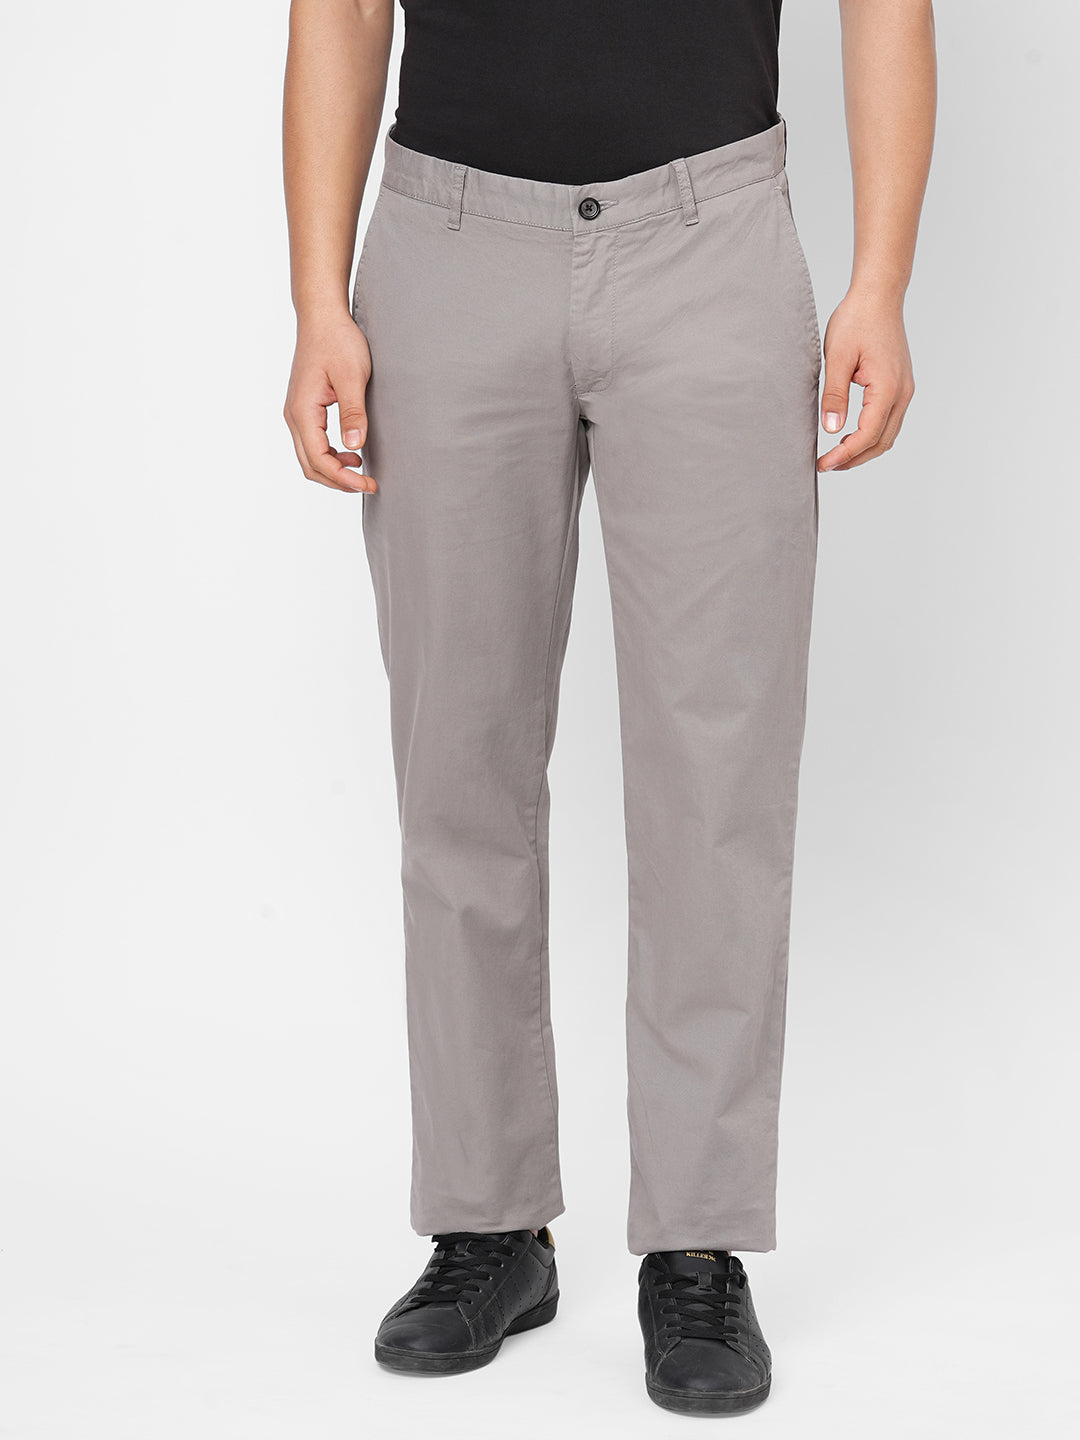 Buy sparky pants for men cotton in India @ Limeroad